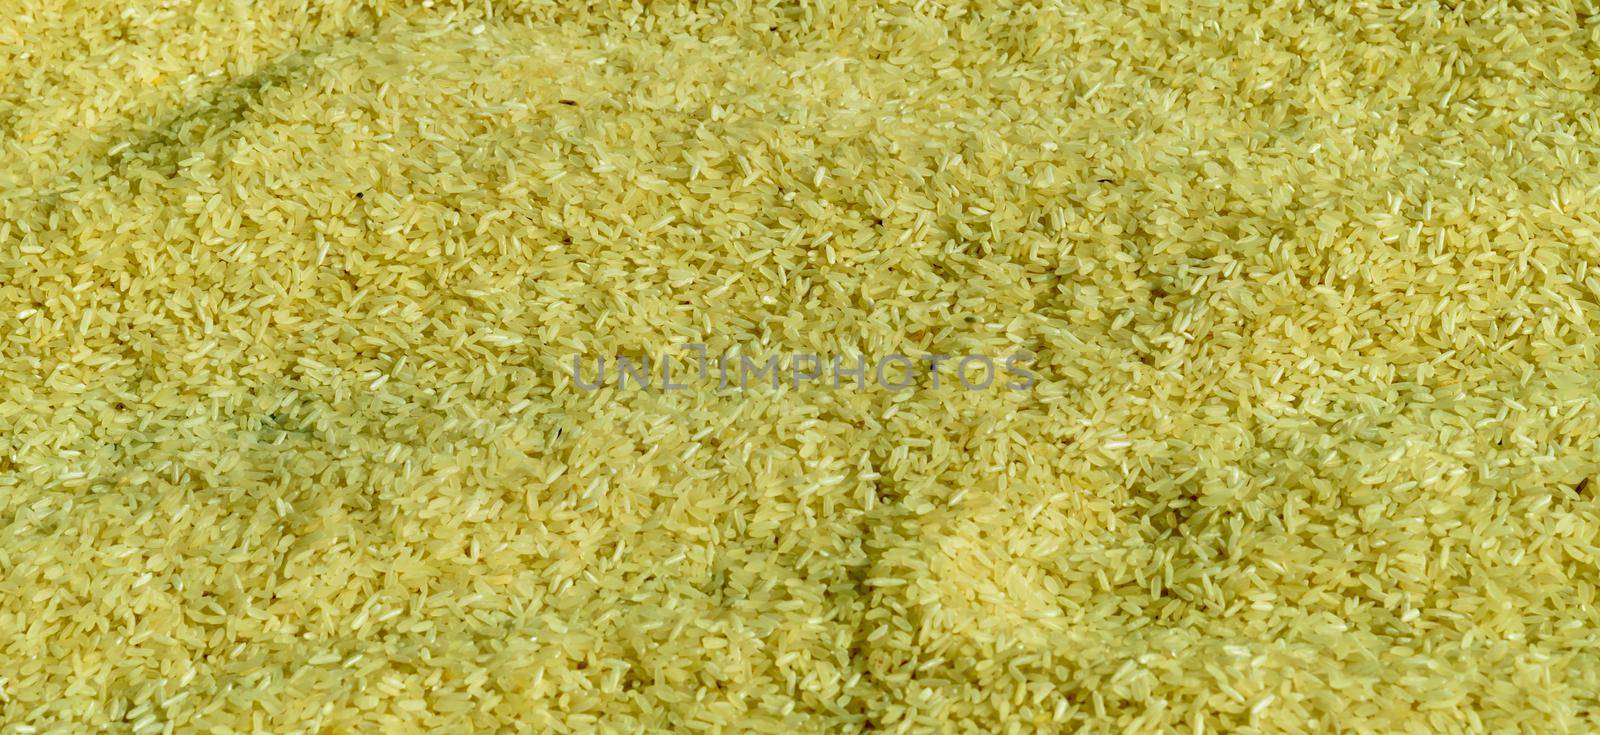 Full Frame Shot Of Rice Grain in Sunlight. Food Background. High Angle view. Flat Lay.